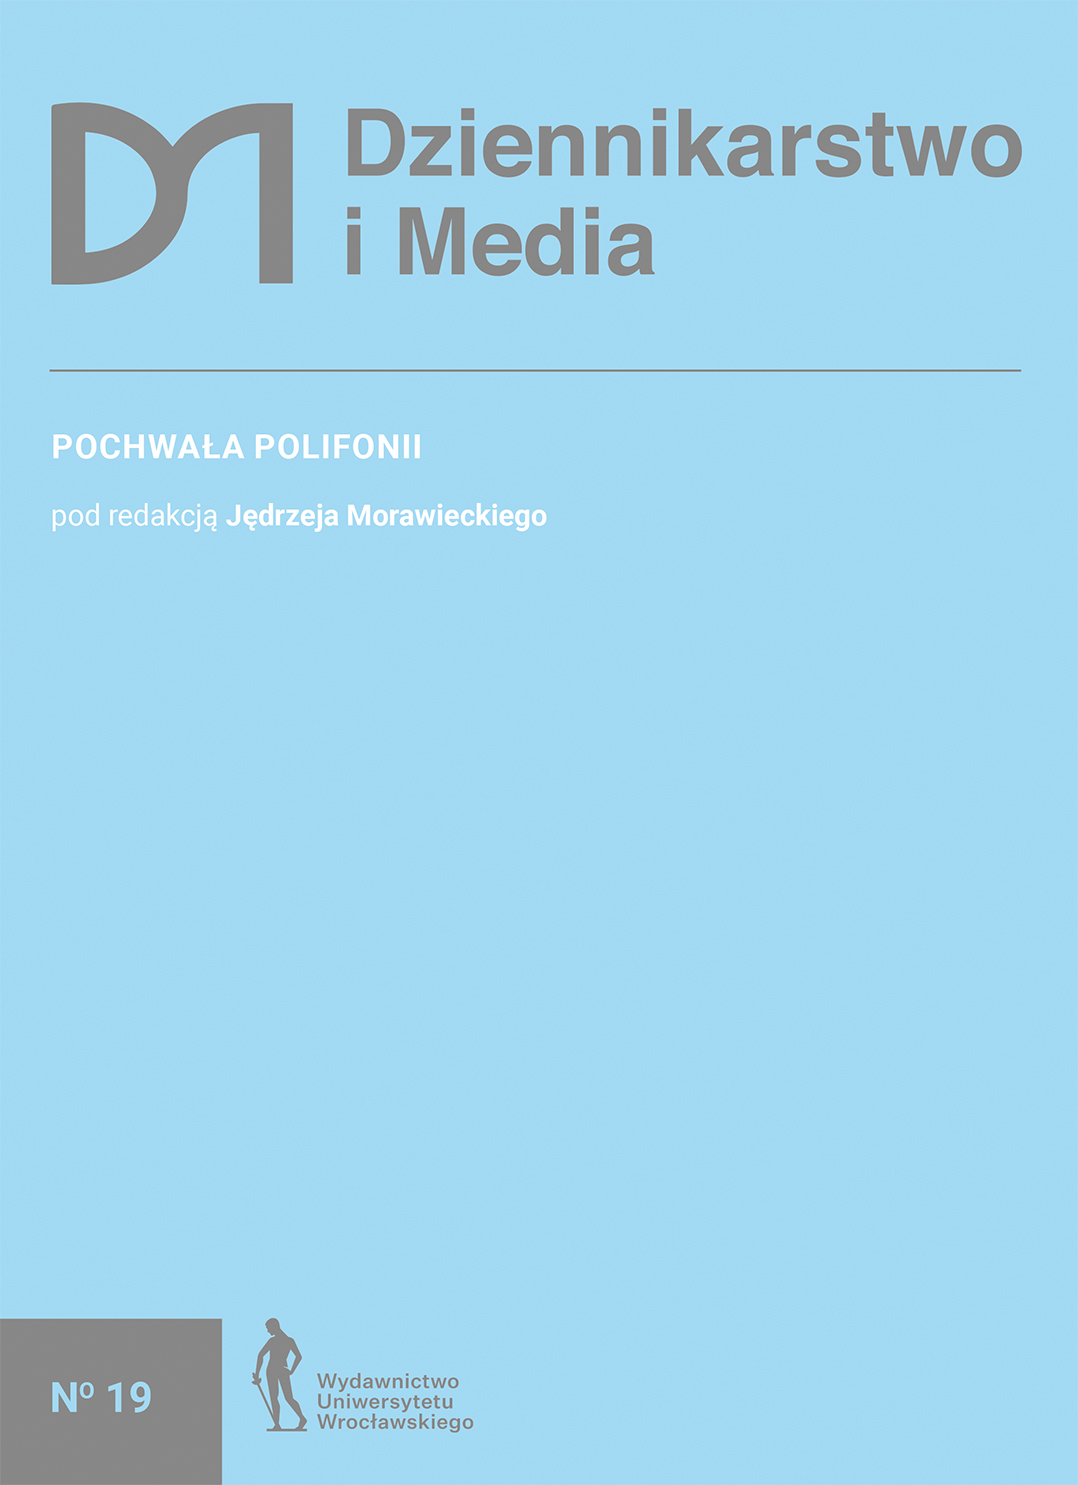 Report on the jubilee of the Dean of the Faculty of Journalism, Information and Book Studies of the University of Warsaw Prof. dr. hab. Janusz W. Adamowski and the Media Studies Seminar “Democratic Values in Media Systems” Cover Image